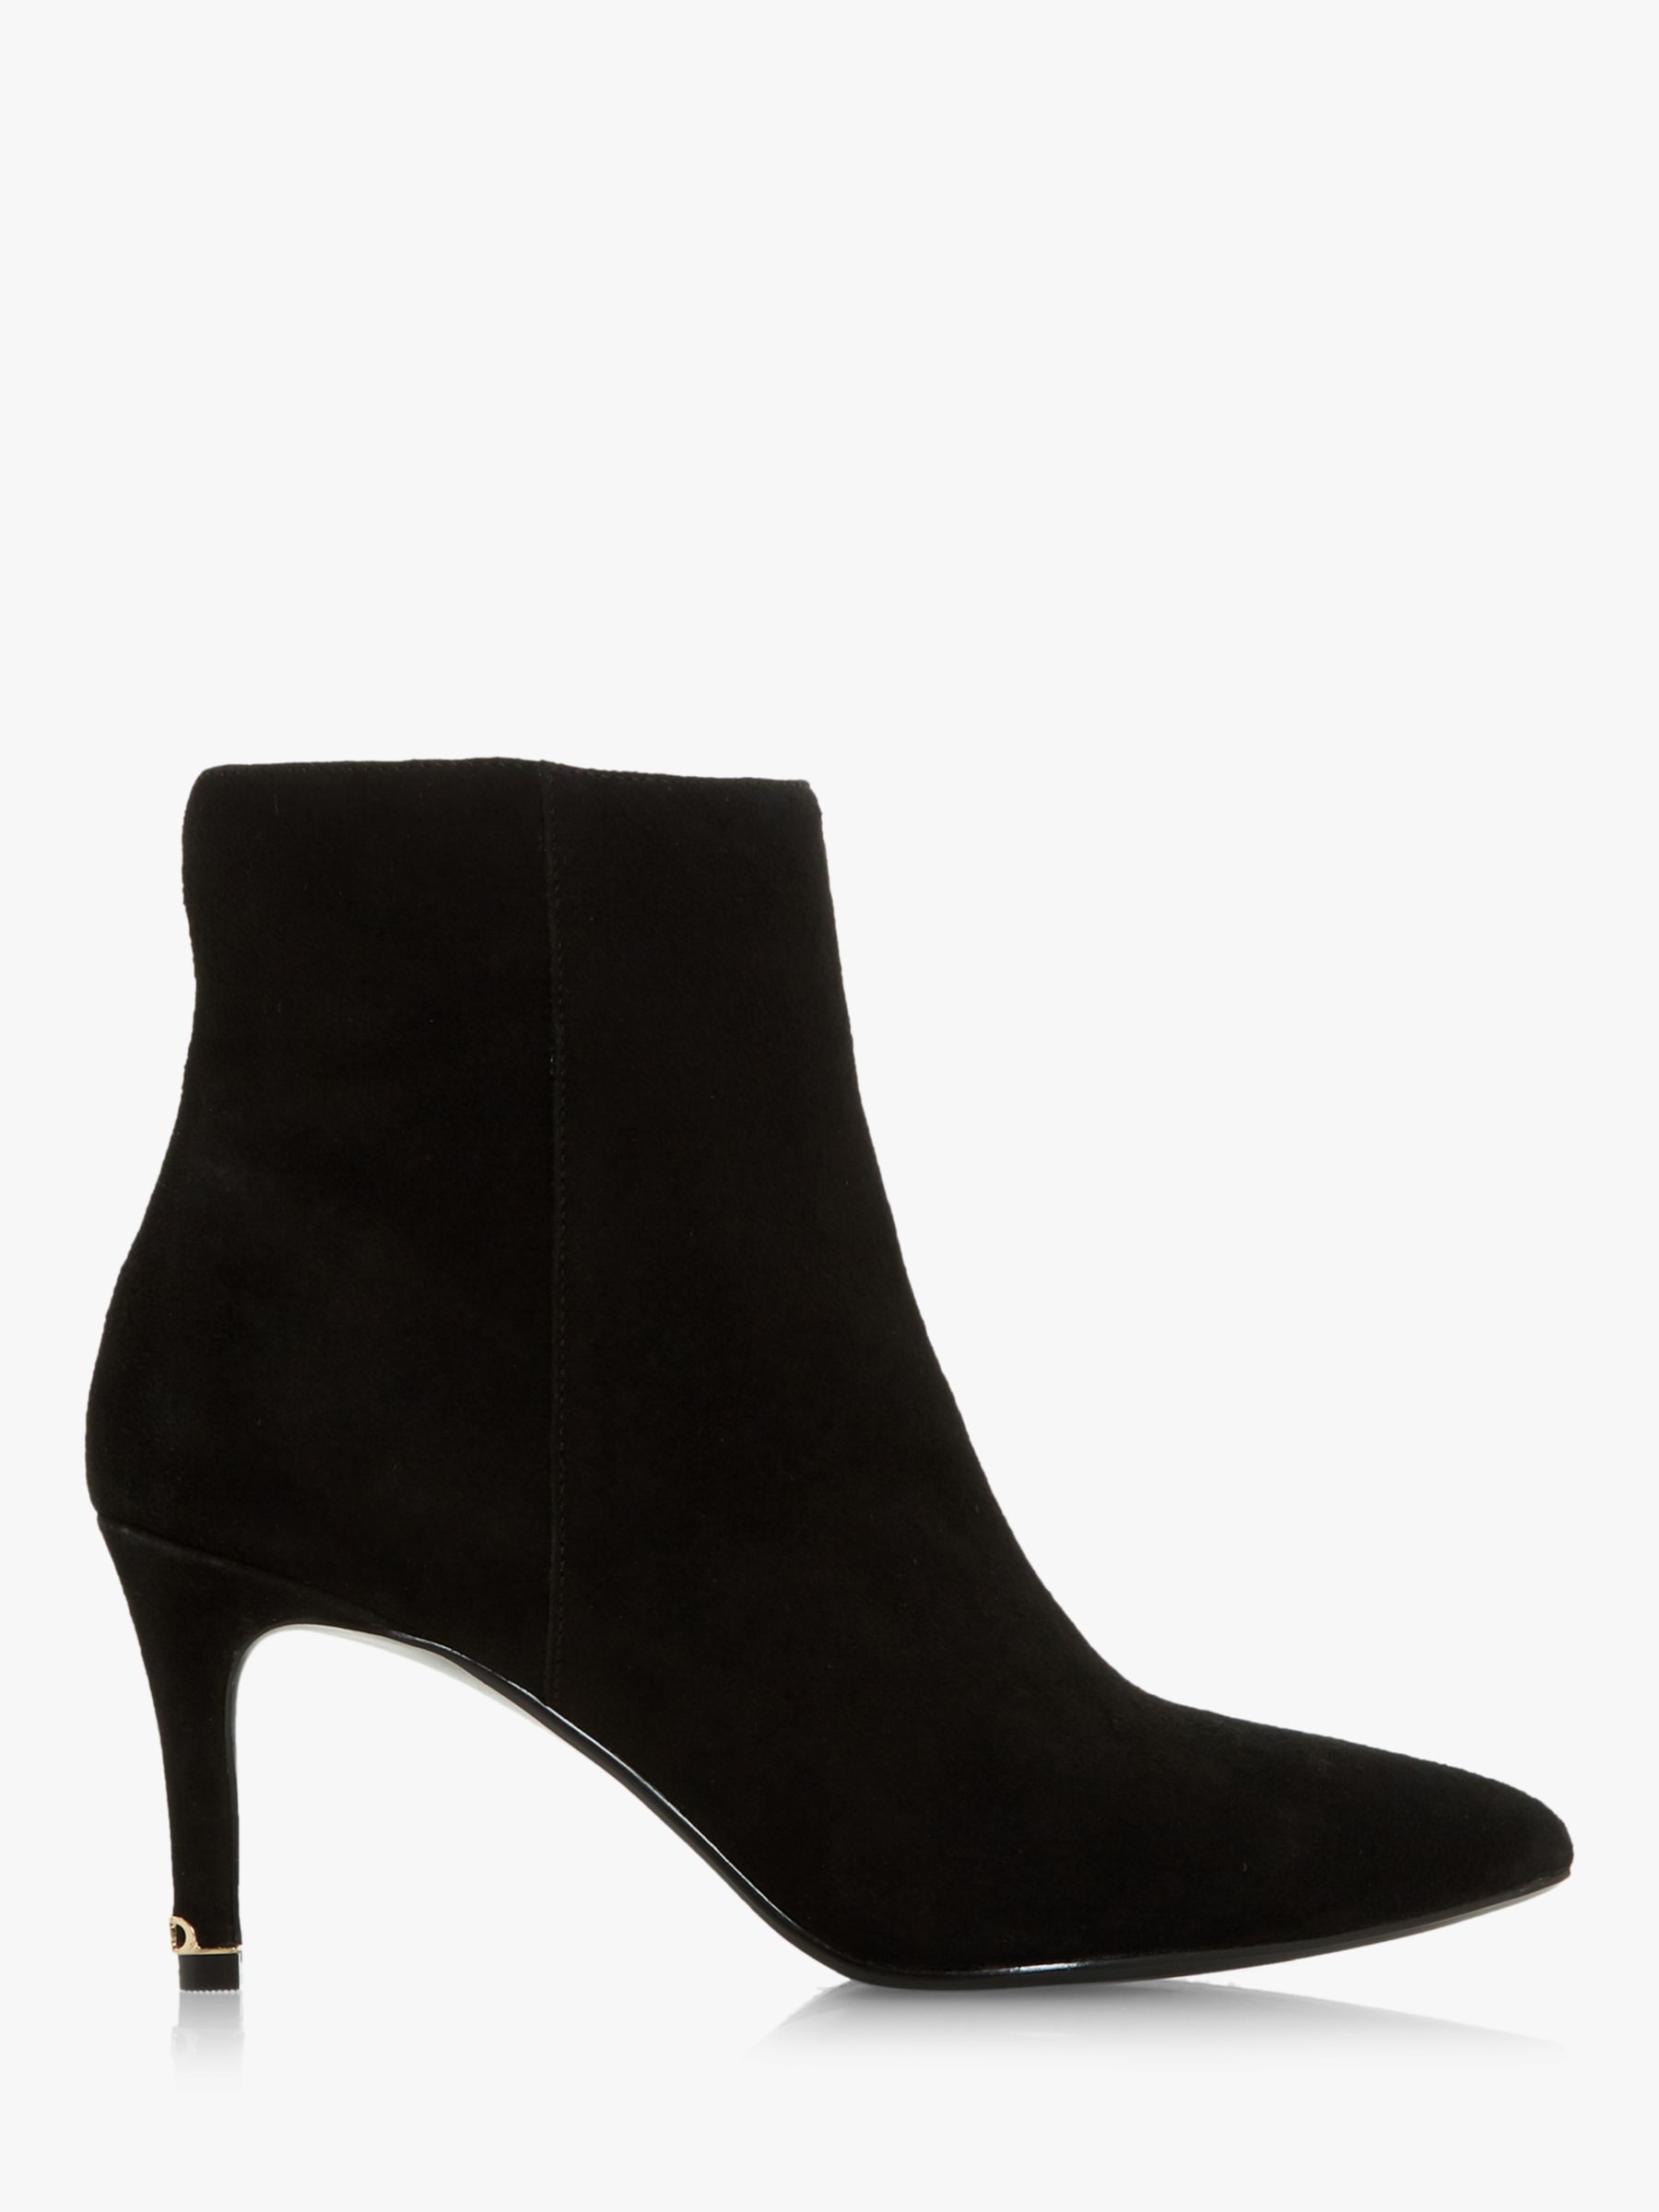 Dune Obsessive Pointed Toe Suede Ankle Boots, Black at John Lewis ...